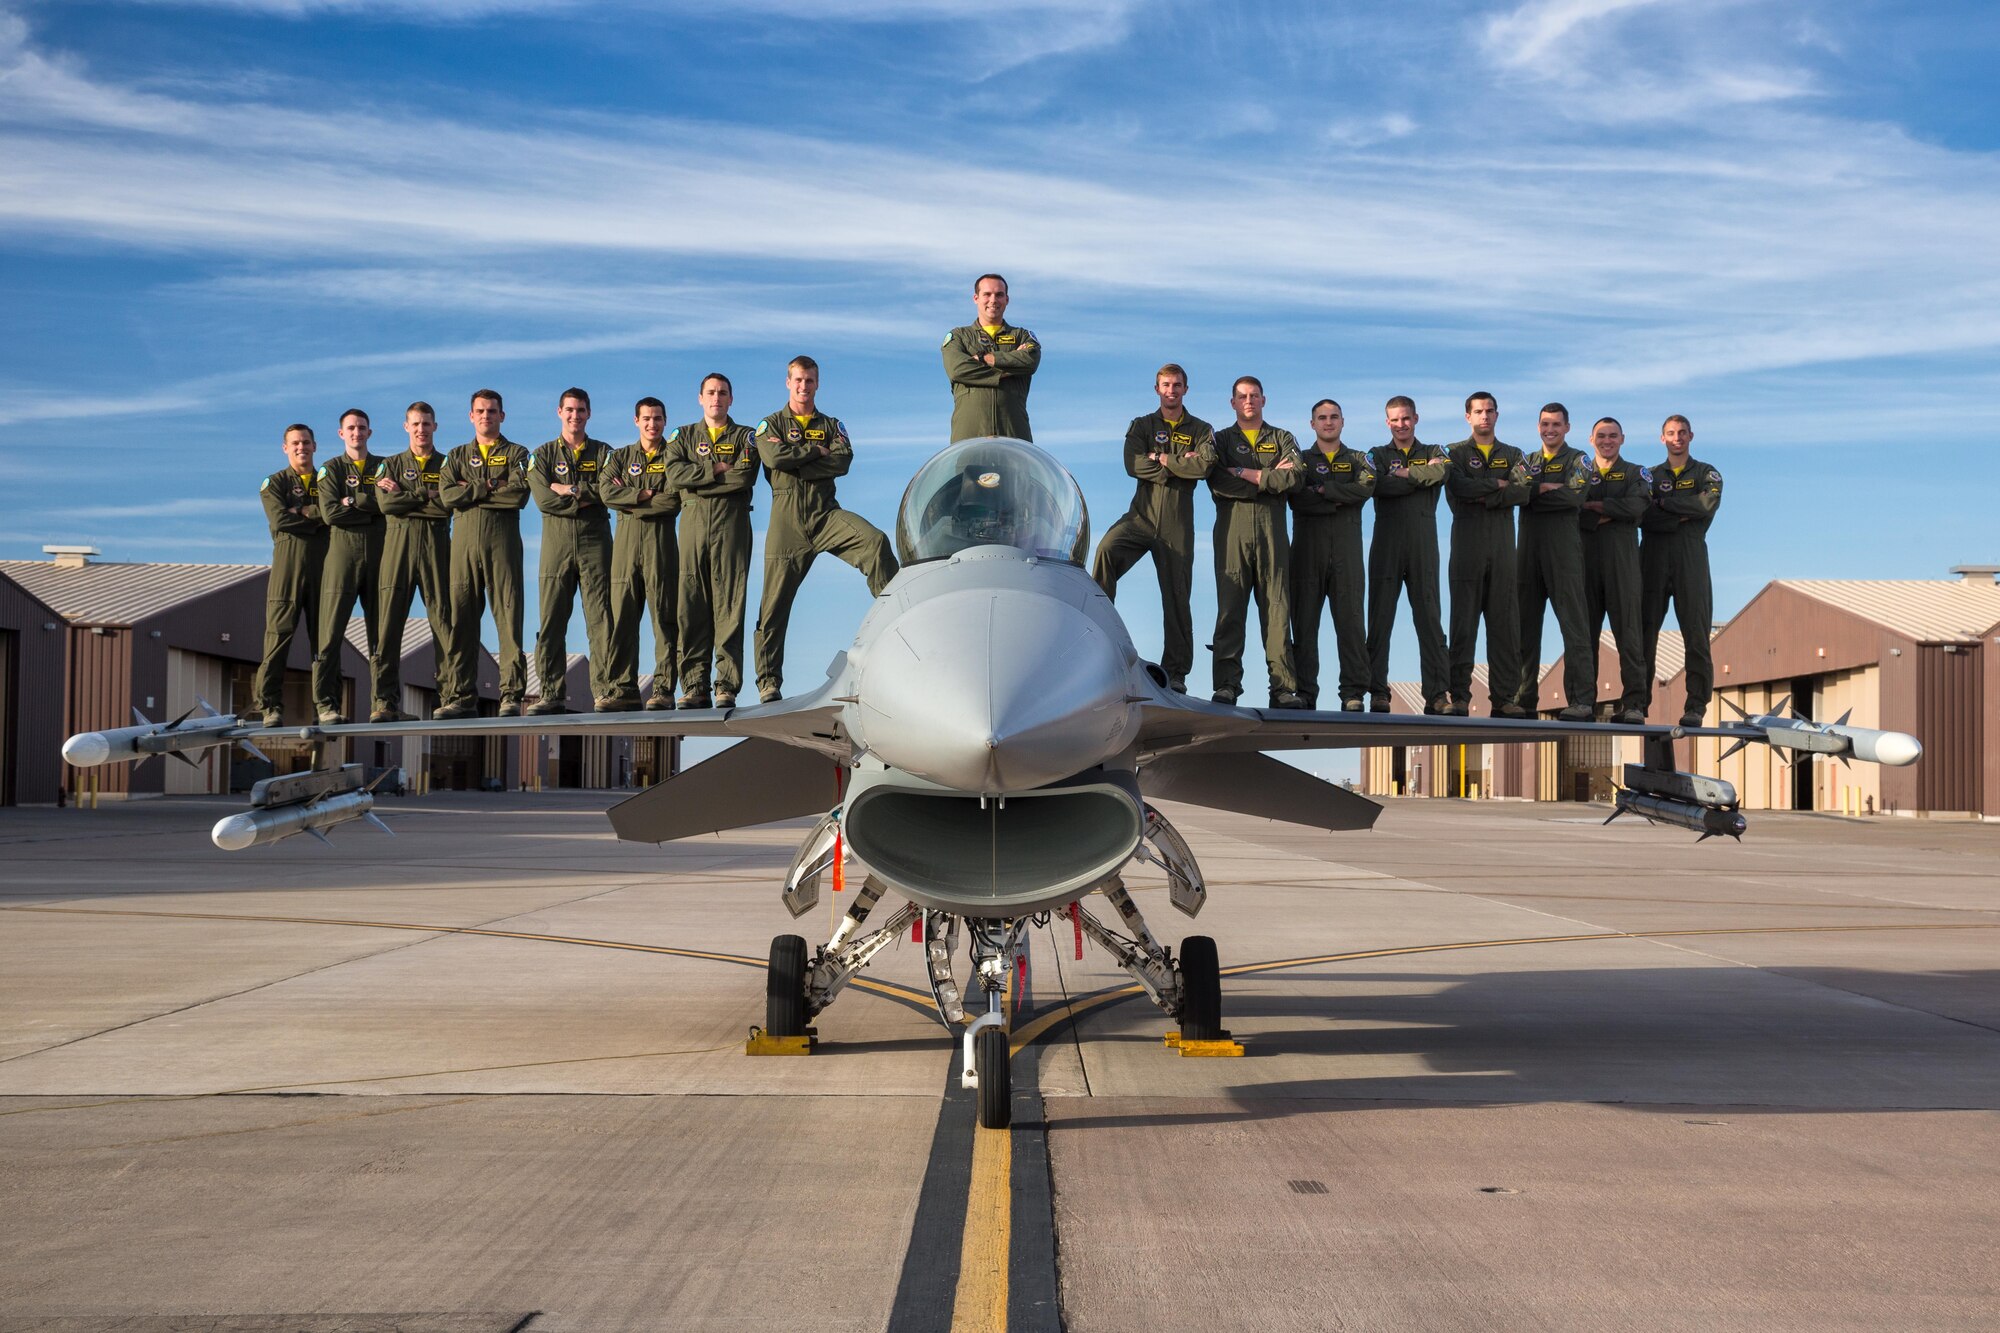 Class 15-BBH, the inaugural class from the 314th Fighter Squadron, stands on top of an F-16 Fighting Falcon at Holloman Air Force Base, N.M. Over 60 percent of the 17-man class will be going overseas following their June 25th graduation. (Courtesy Photo)